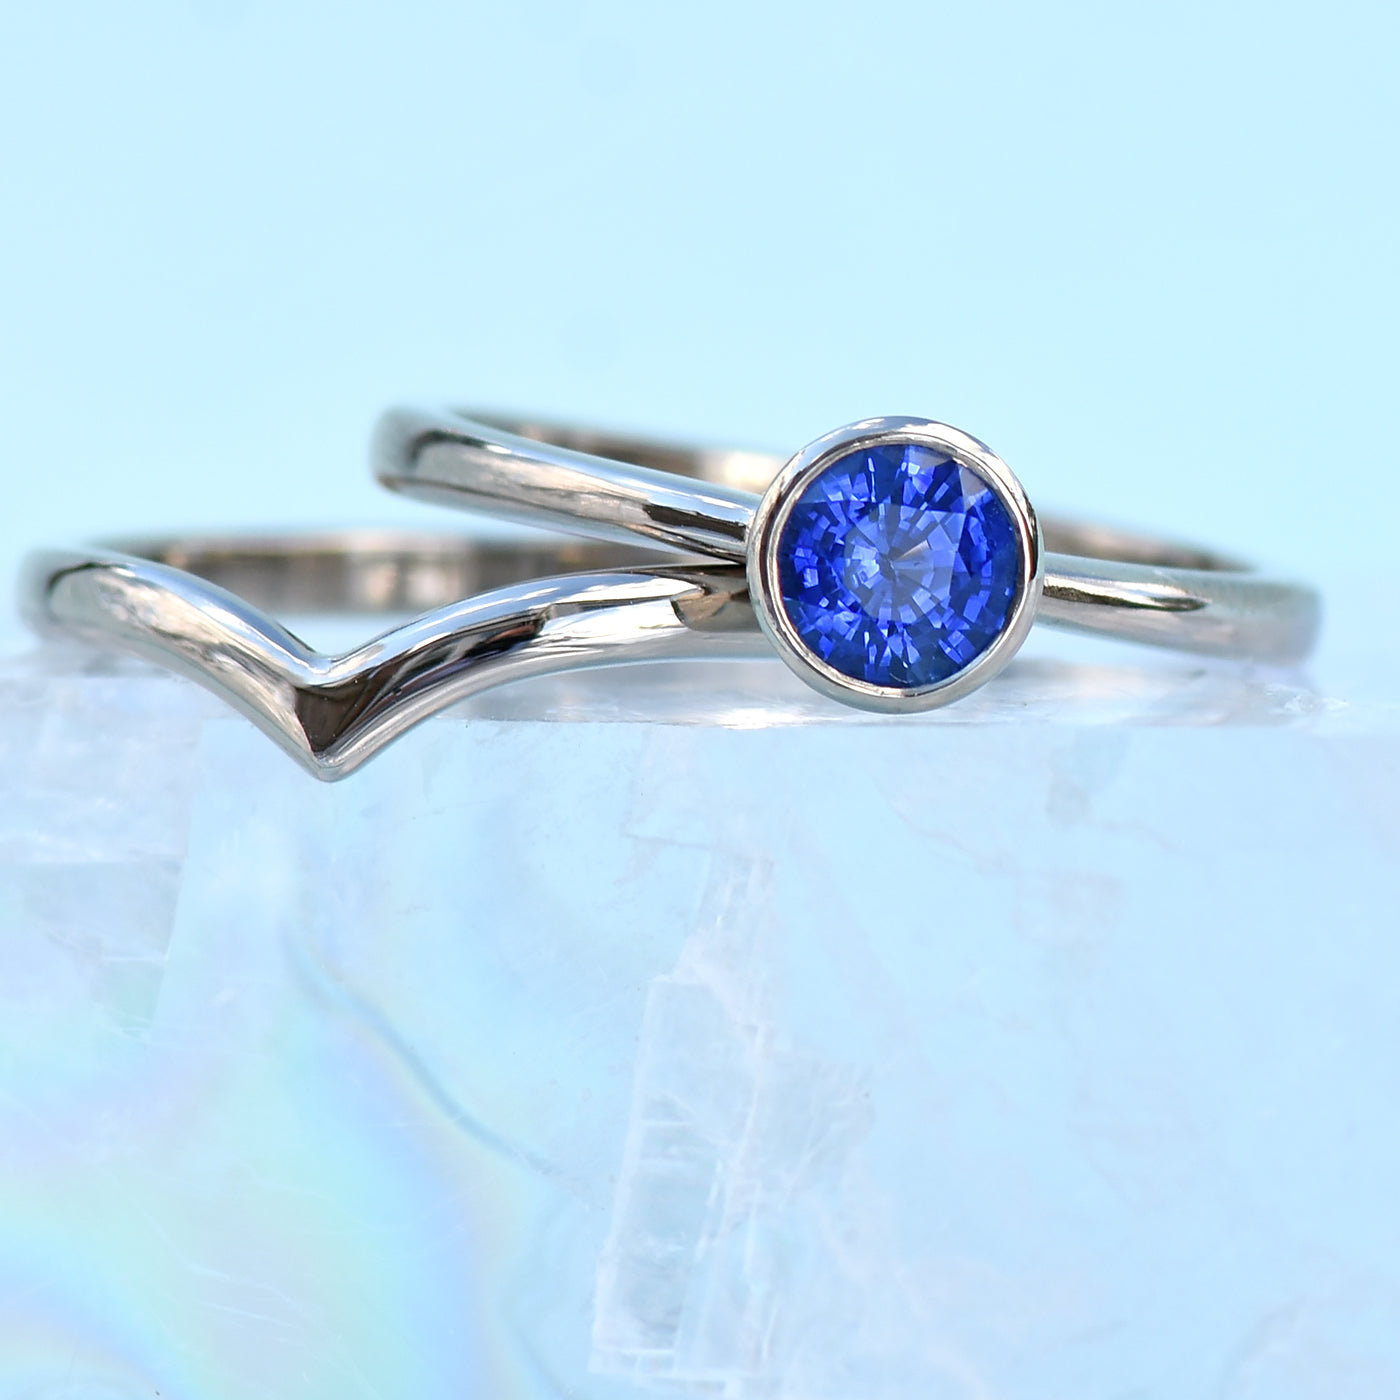 18ct white gold & blue sapphire stacking ring set